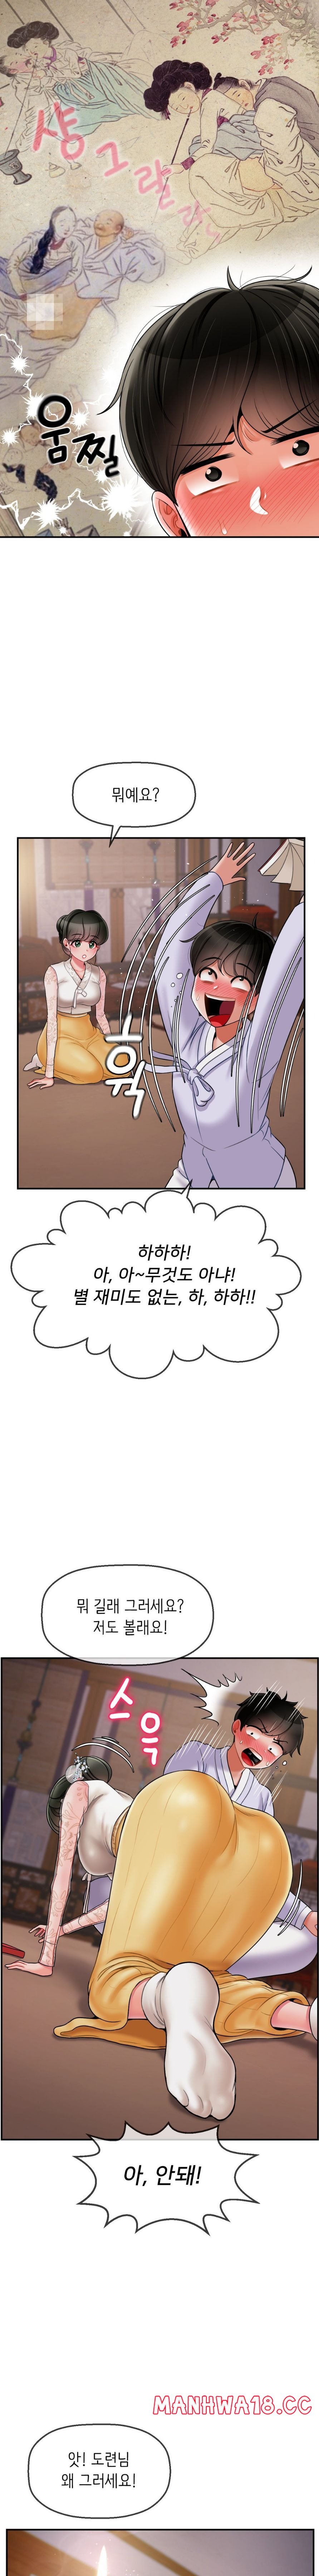 seventeenth-only-son-raw-chap-3-19